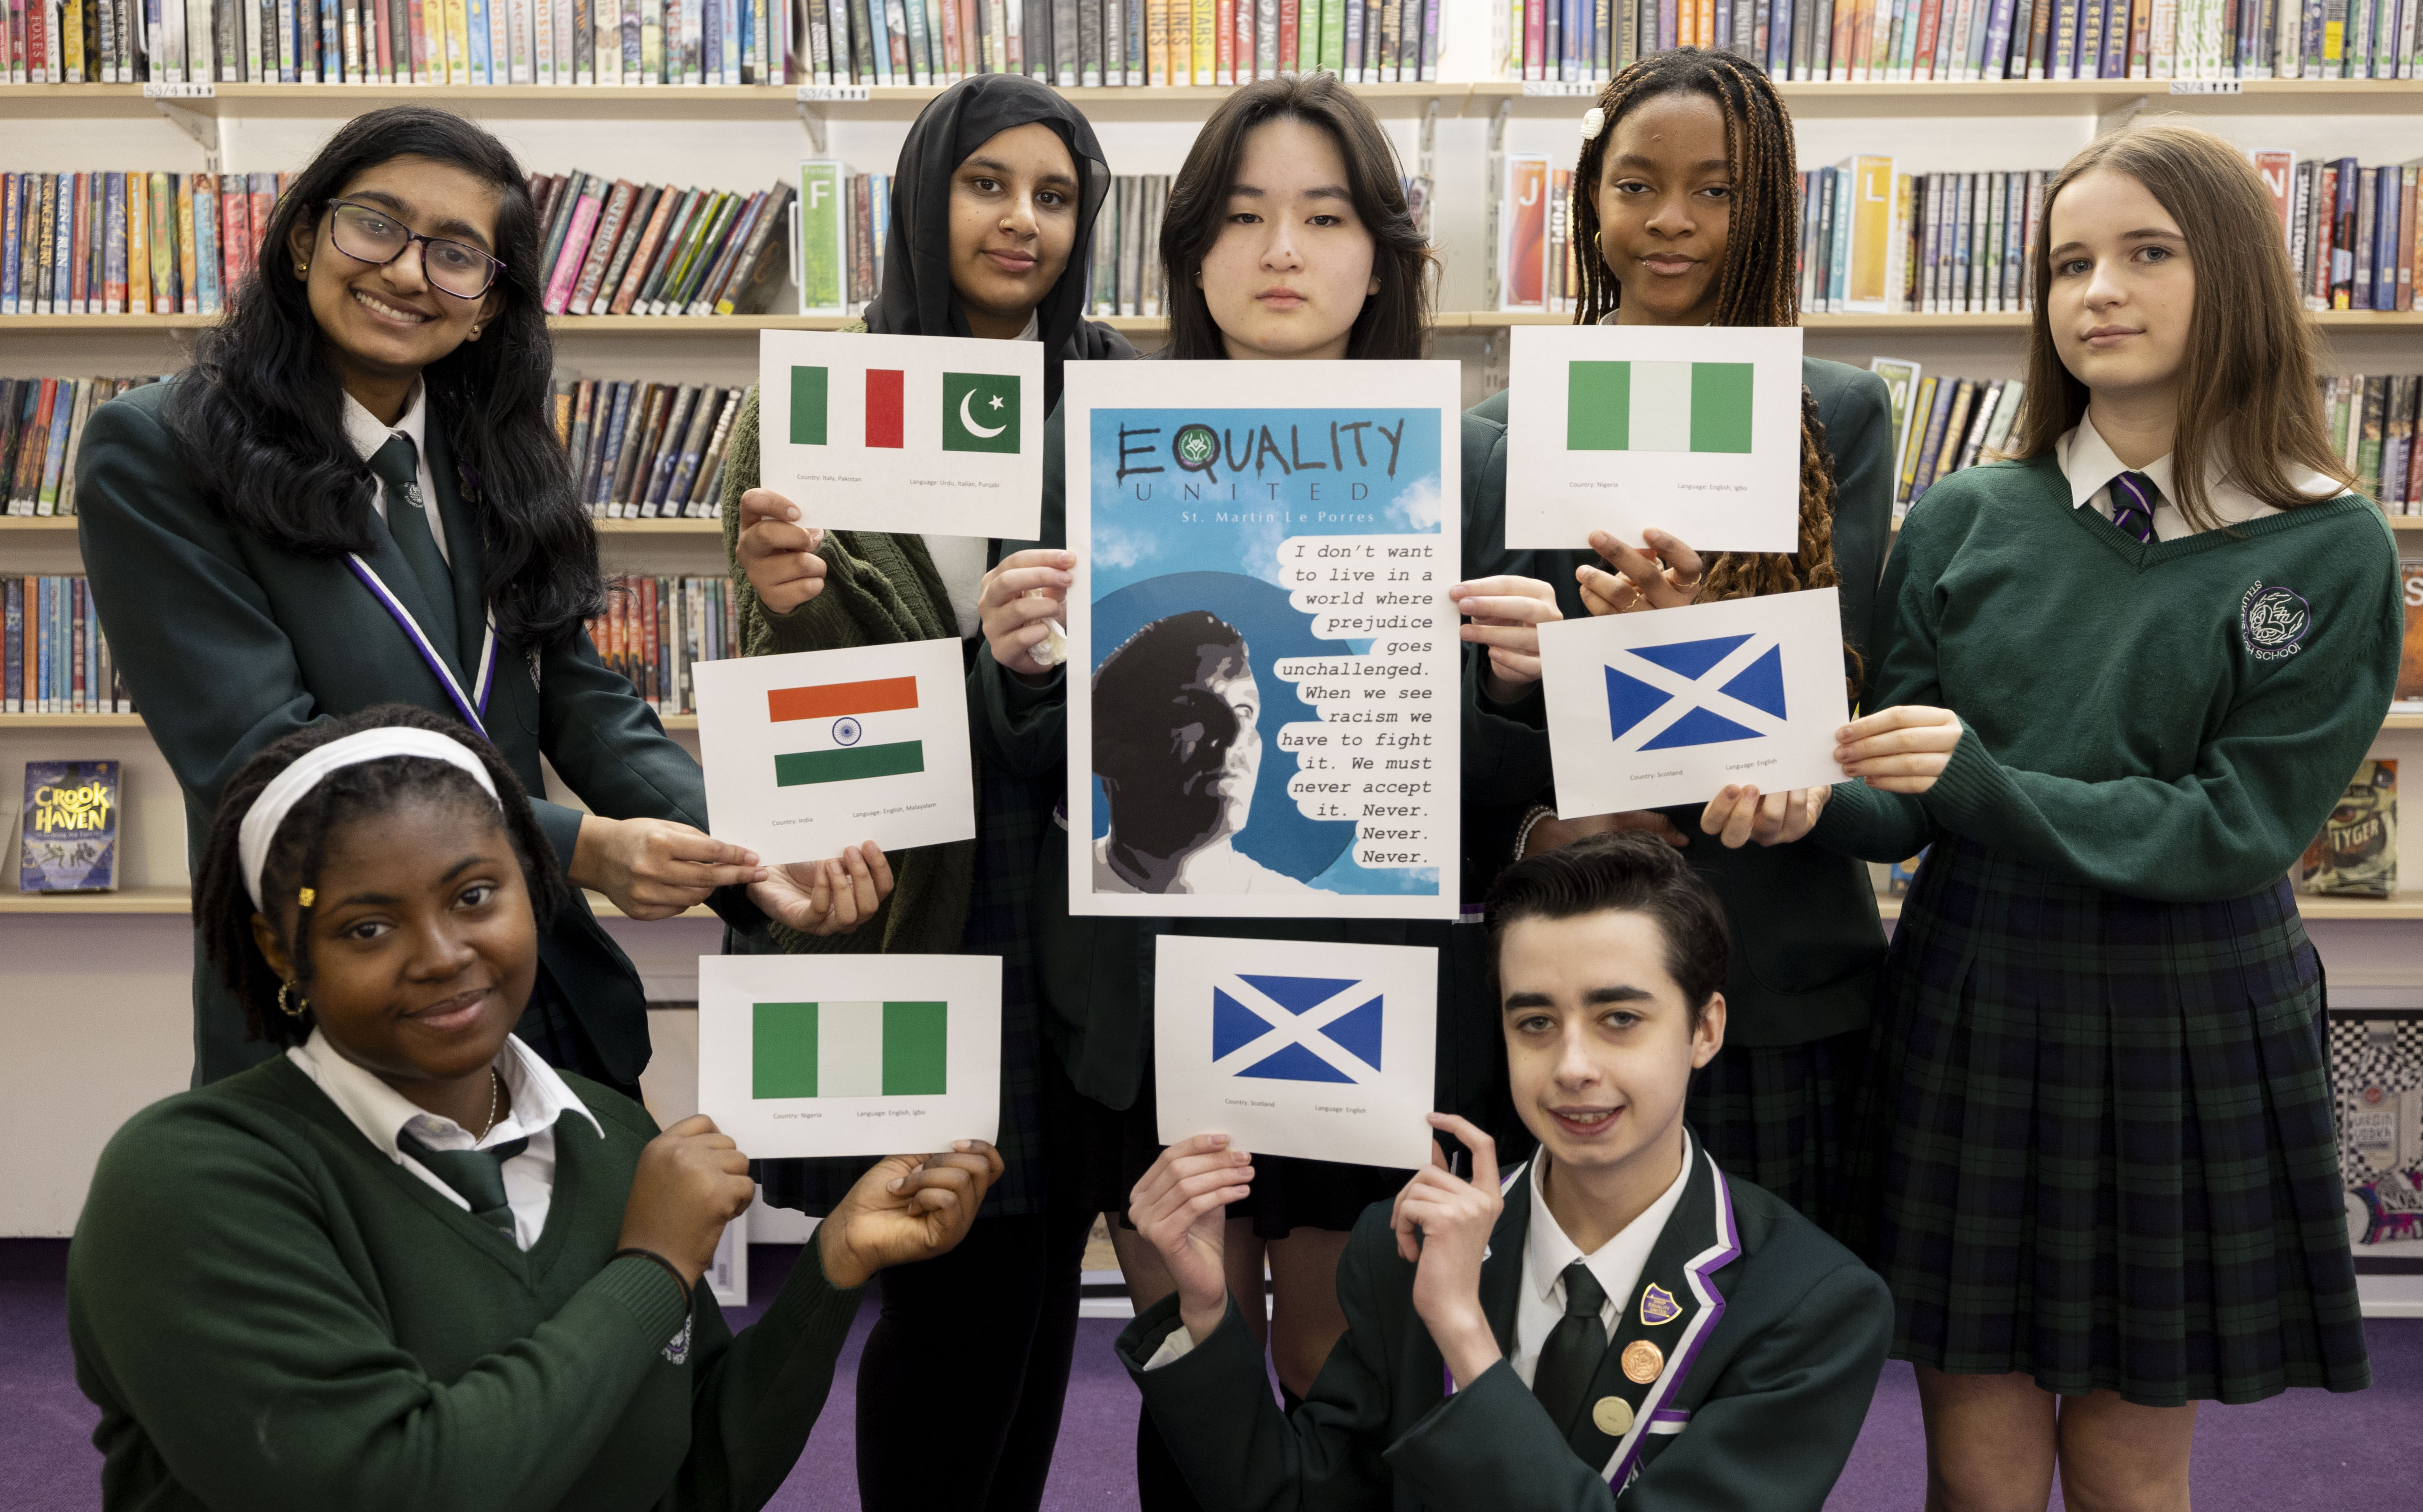 seven young people of different ethnicity wear green school uniforms  and smile. They each hold flags from different nations including Scotland, Nigeria and Pakistan . The person in the centre holds a sign reading "equality united, i don't want to live in a world where prejudice goes unchallenged. When we see racism, we have to fight it. We must never accept it. never. never. never"  